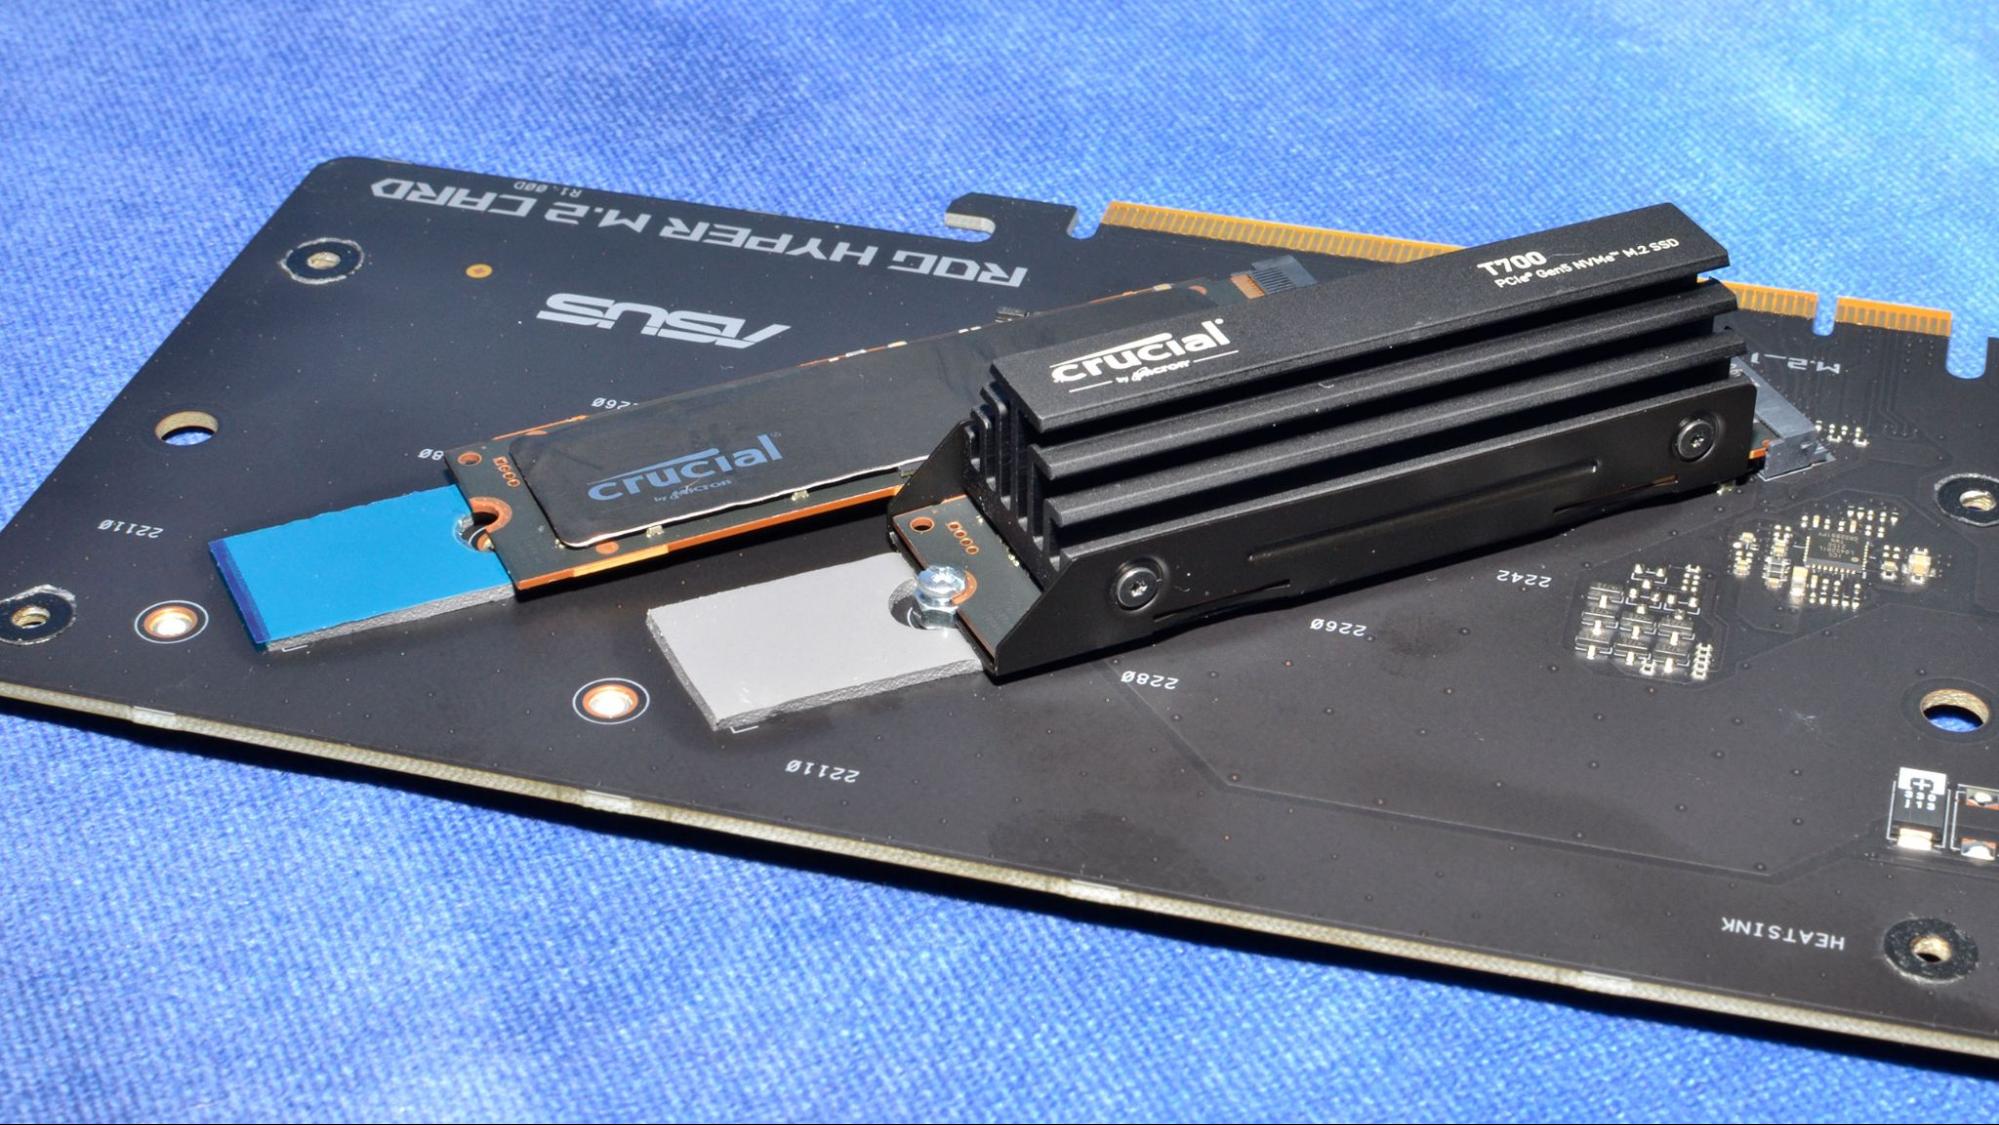 Crucial T700 SSD Preview: Fastest Consumer SSD Hits 12.4 GB/s